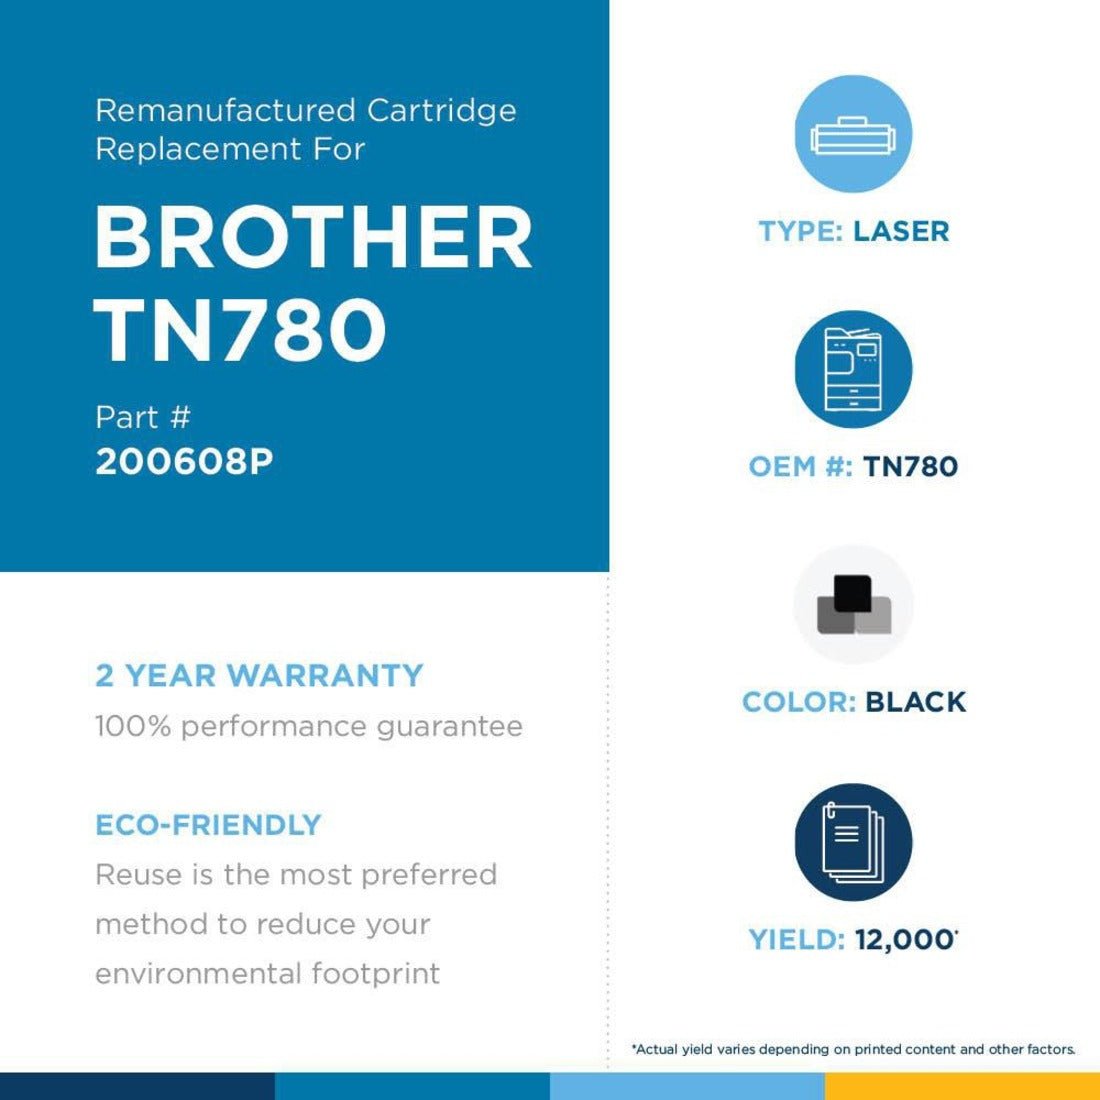 Clover Technologies Remanufactured Extra High Yield Laser Toner Cartridge - Alternative for Brother TN780 TN-3380 TN-3390 - Black Pack